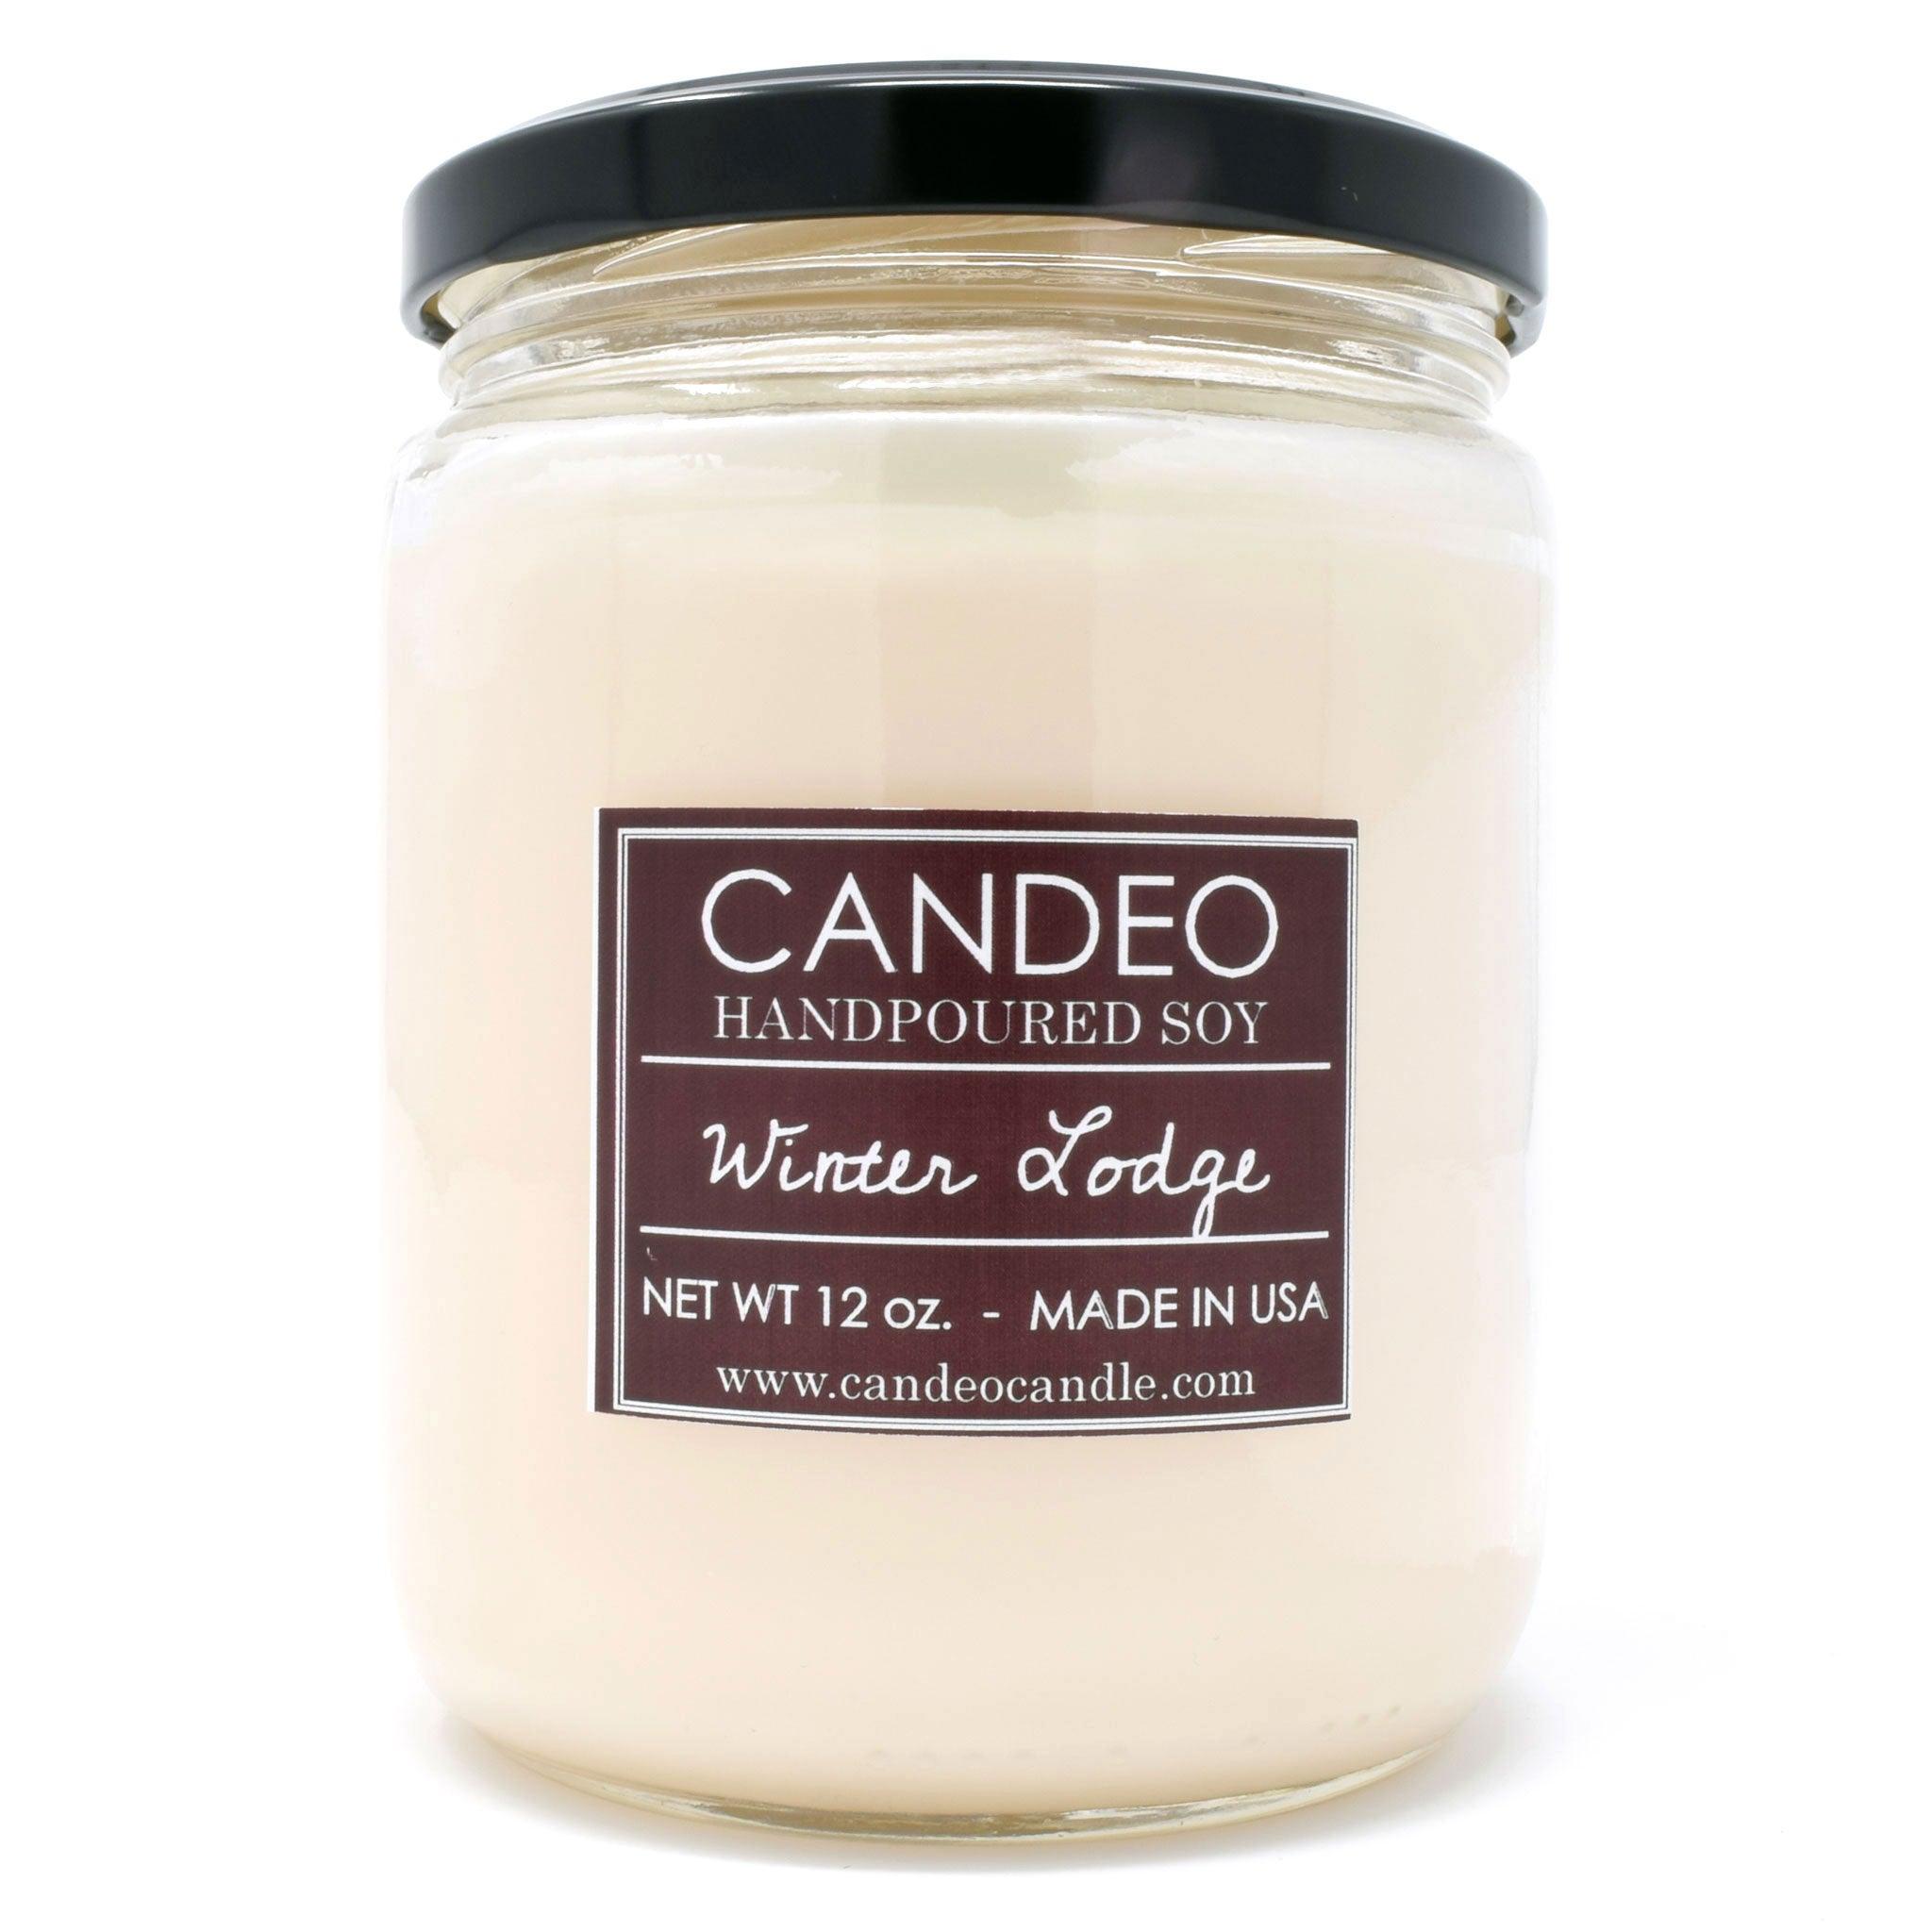 Winter Lodge, 14oz Soy Candle Jar - Candeo Candle